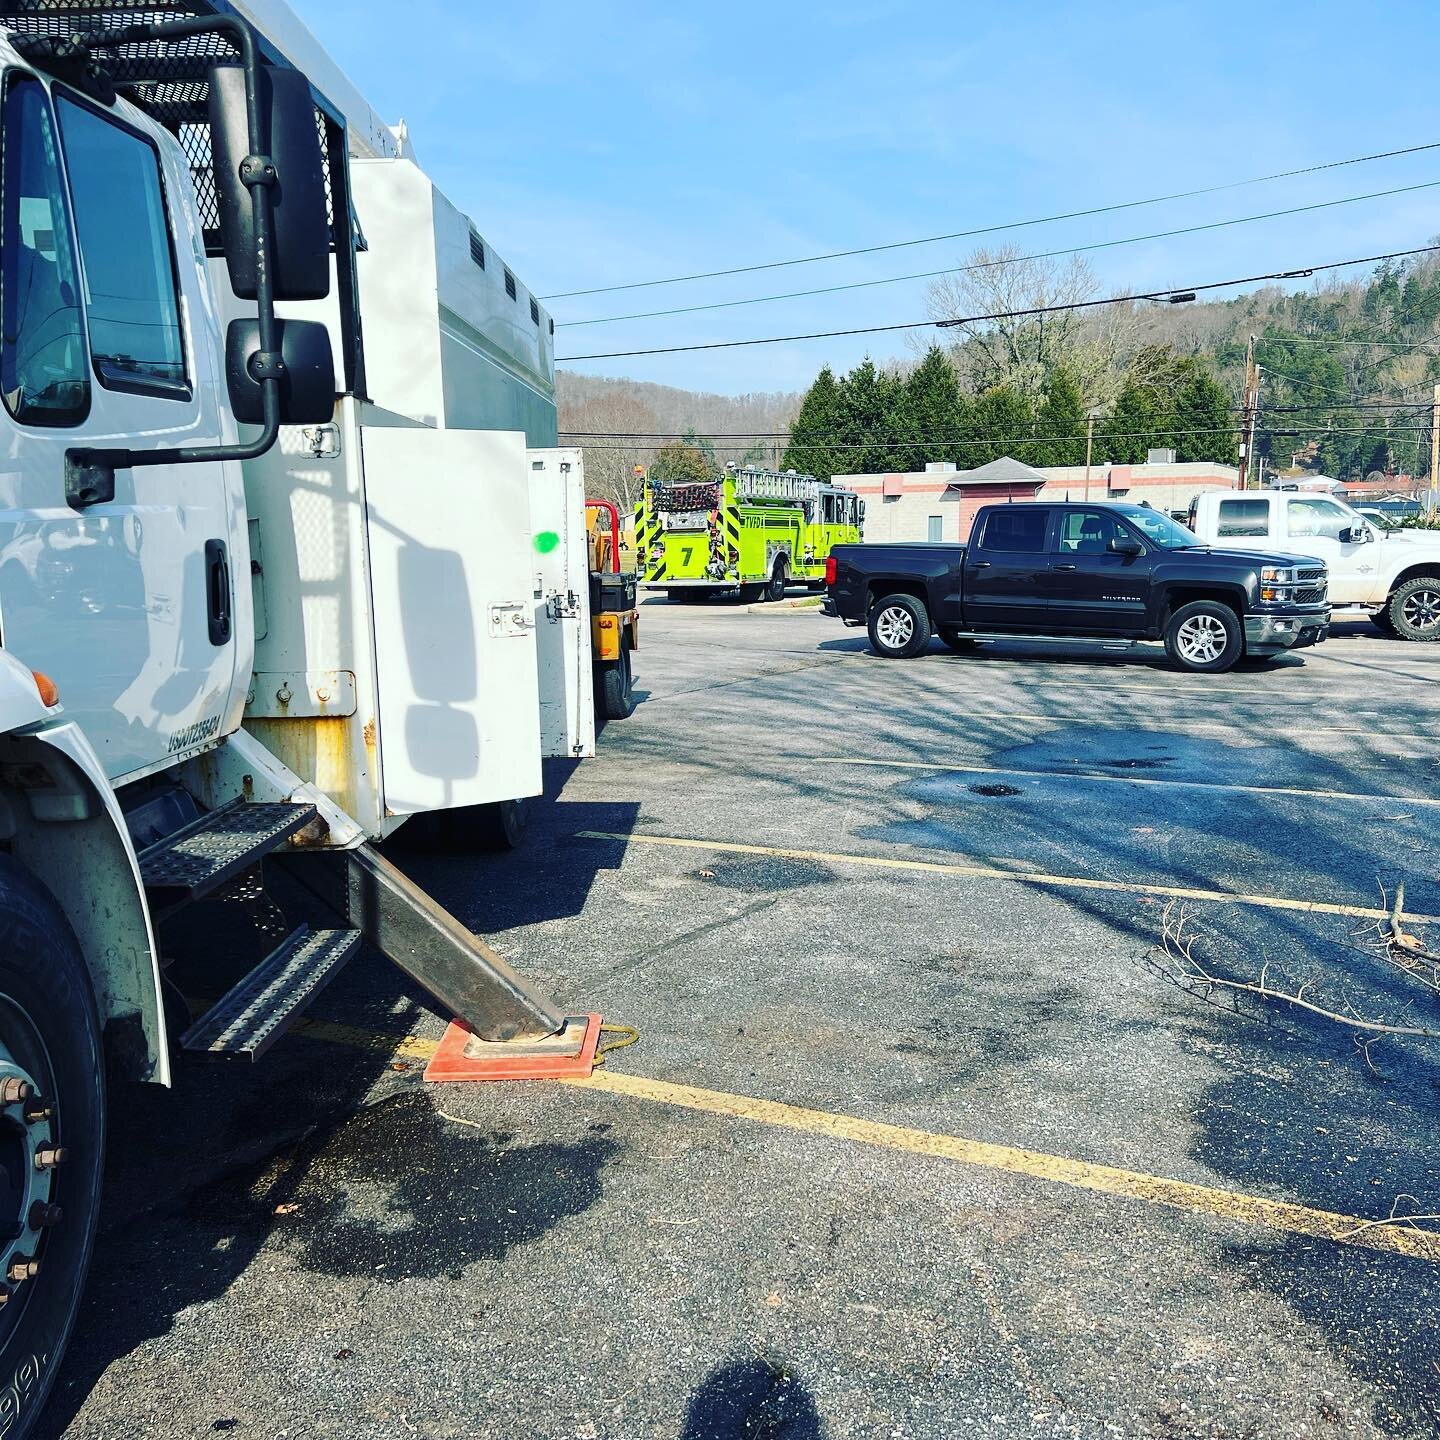 Got the privilege to help out Putnam County Emergency services today on a structure fire 🔥 that jumped over to two maple 🍁 trees. These guys are awesome and they really embody community. #winfield #eleanorwv #townofeleanorwv #putnamcounty #westvirg